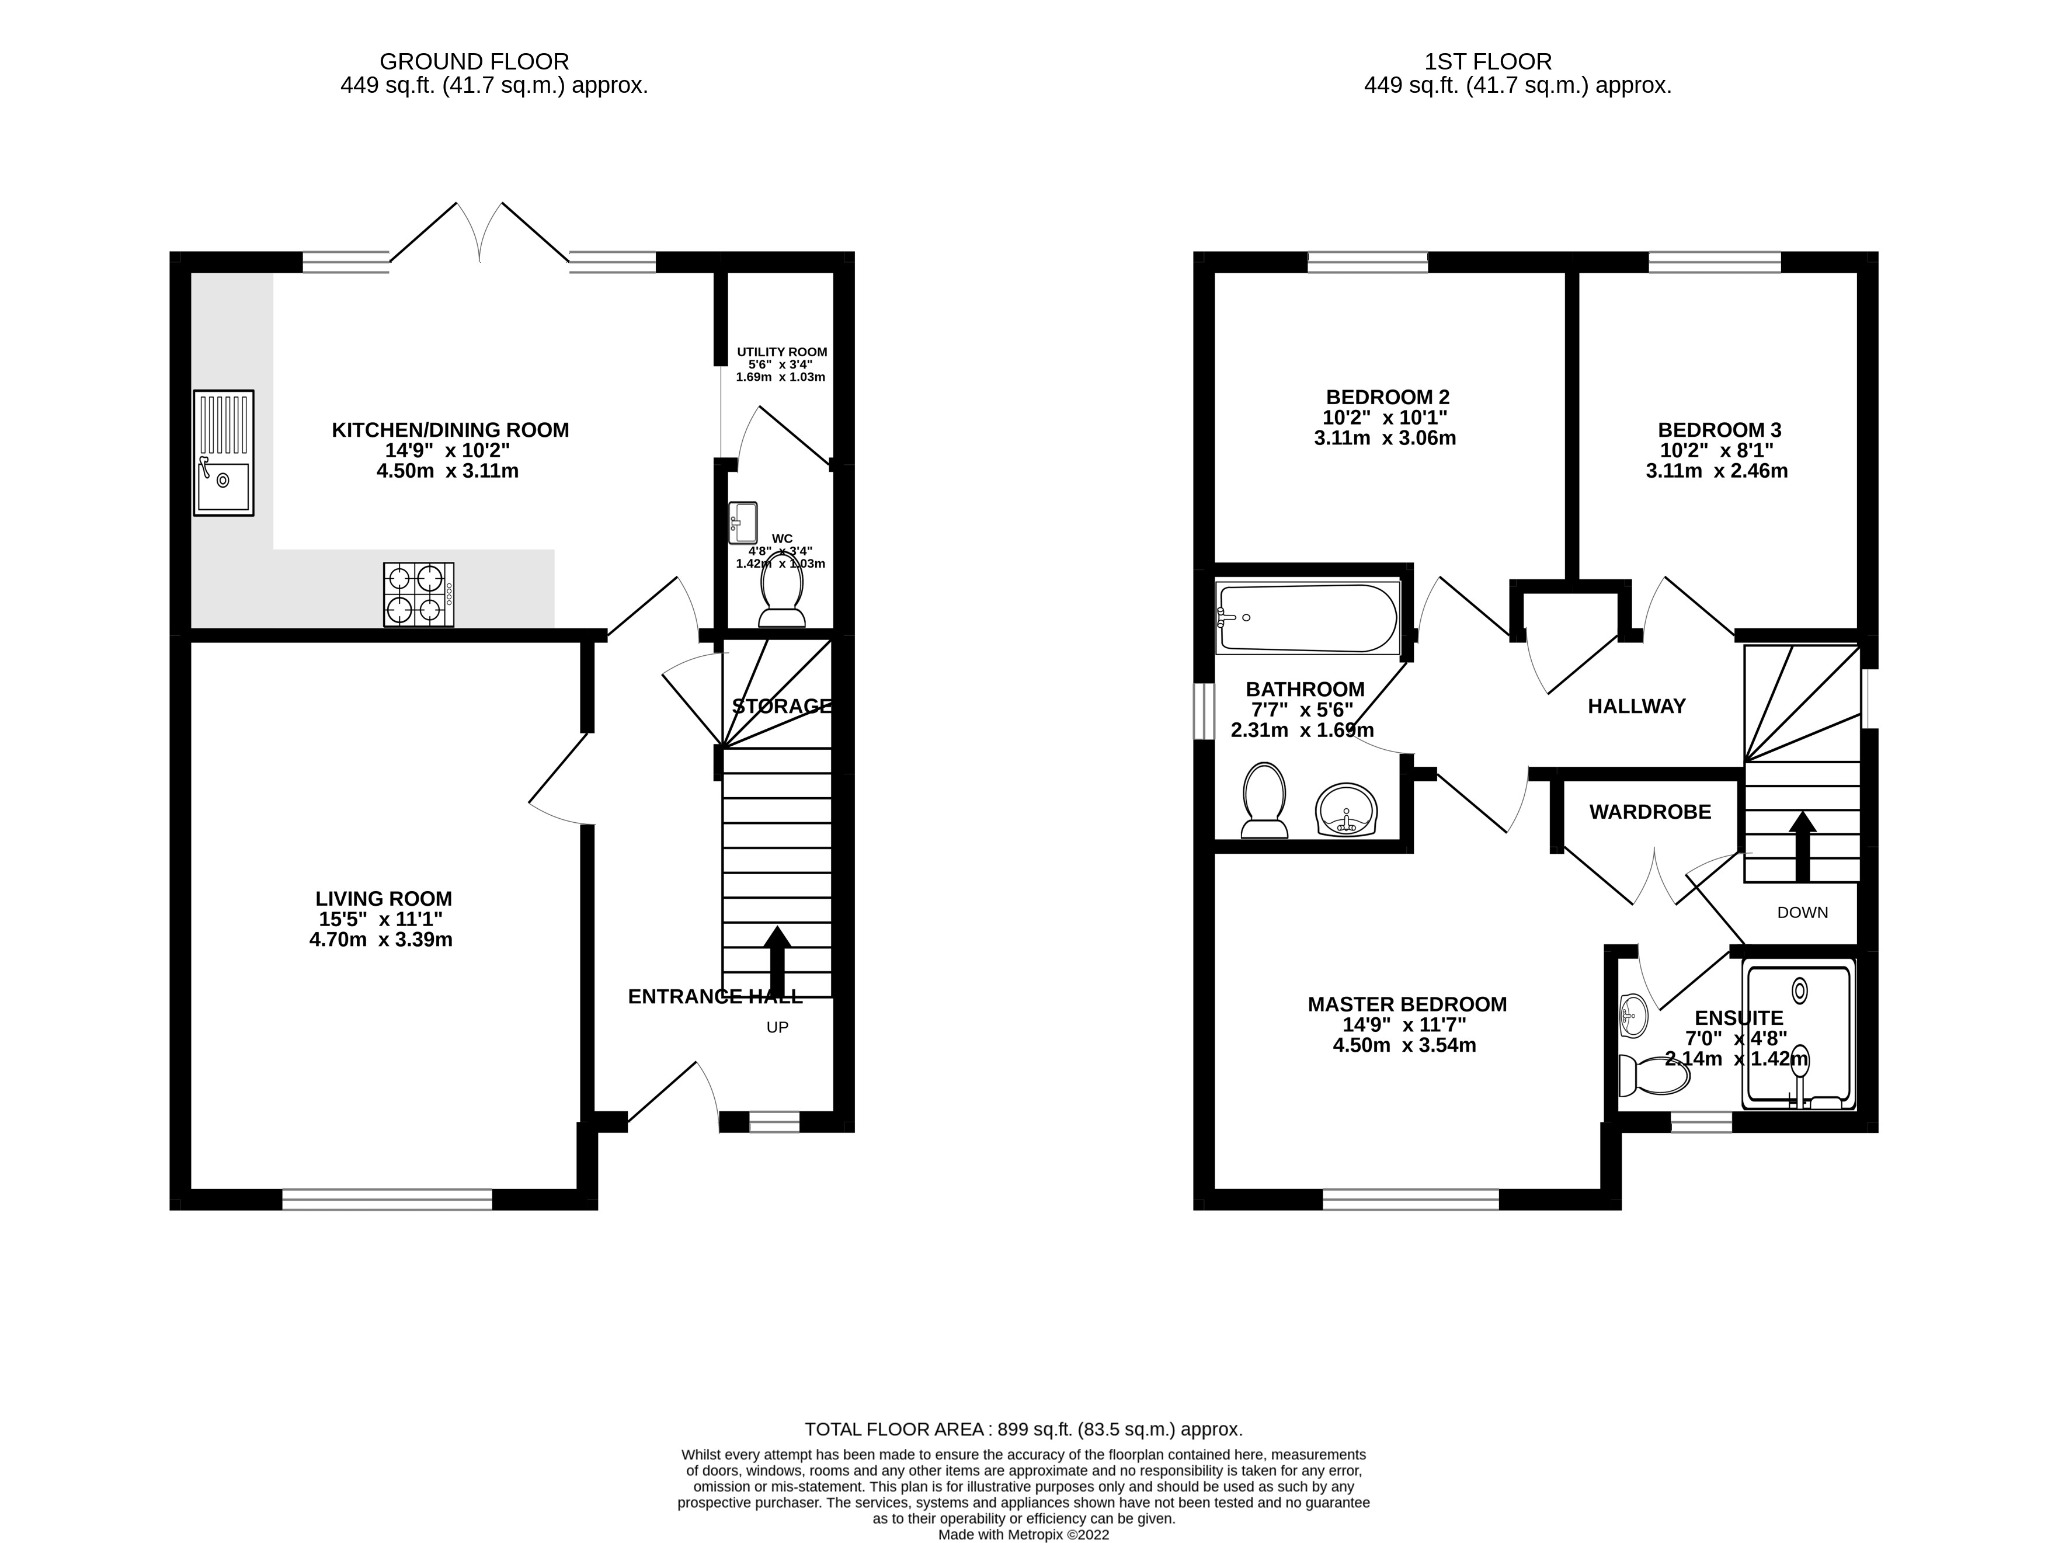 3 bed detached house to rent in Bland Way, Reading - Property floorplan